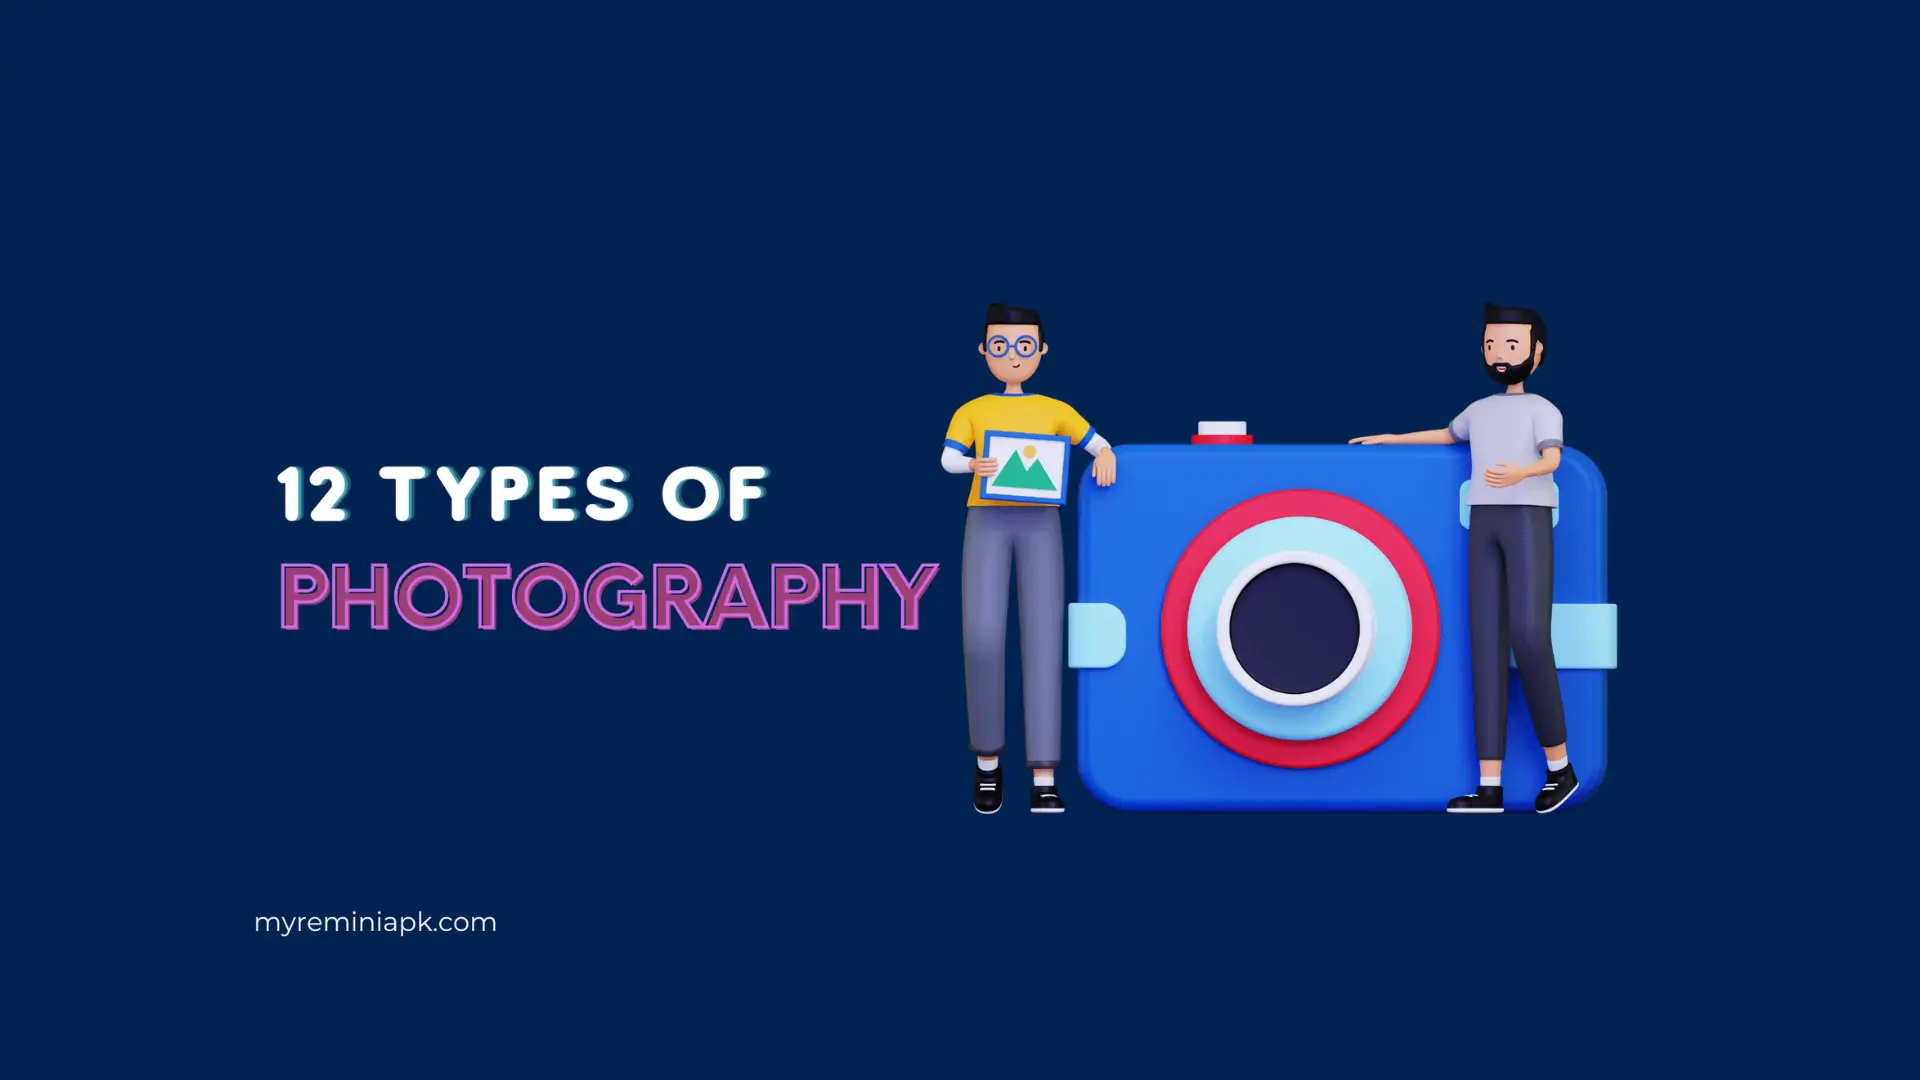 12 types of photography